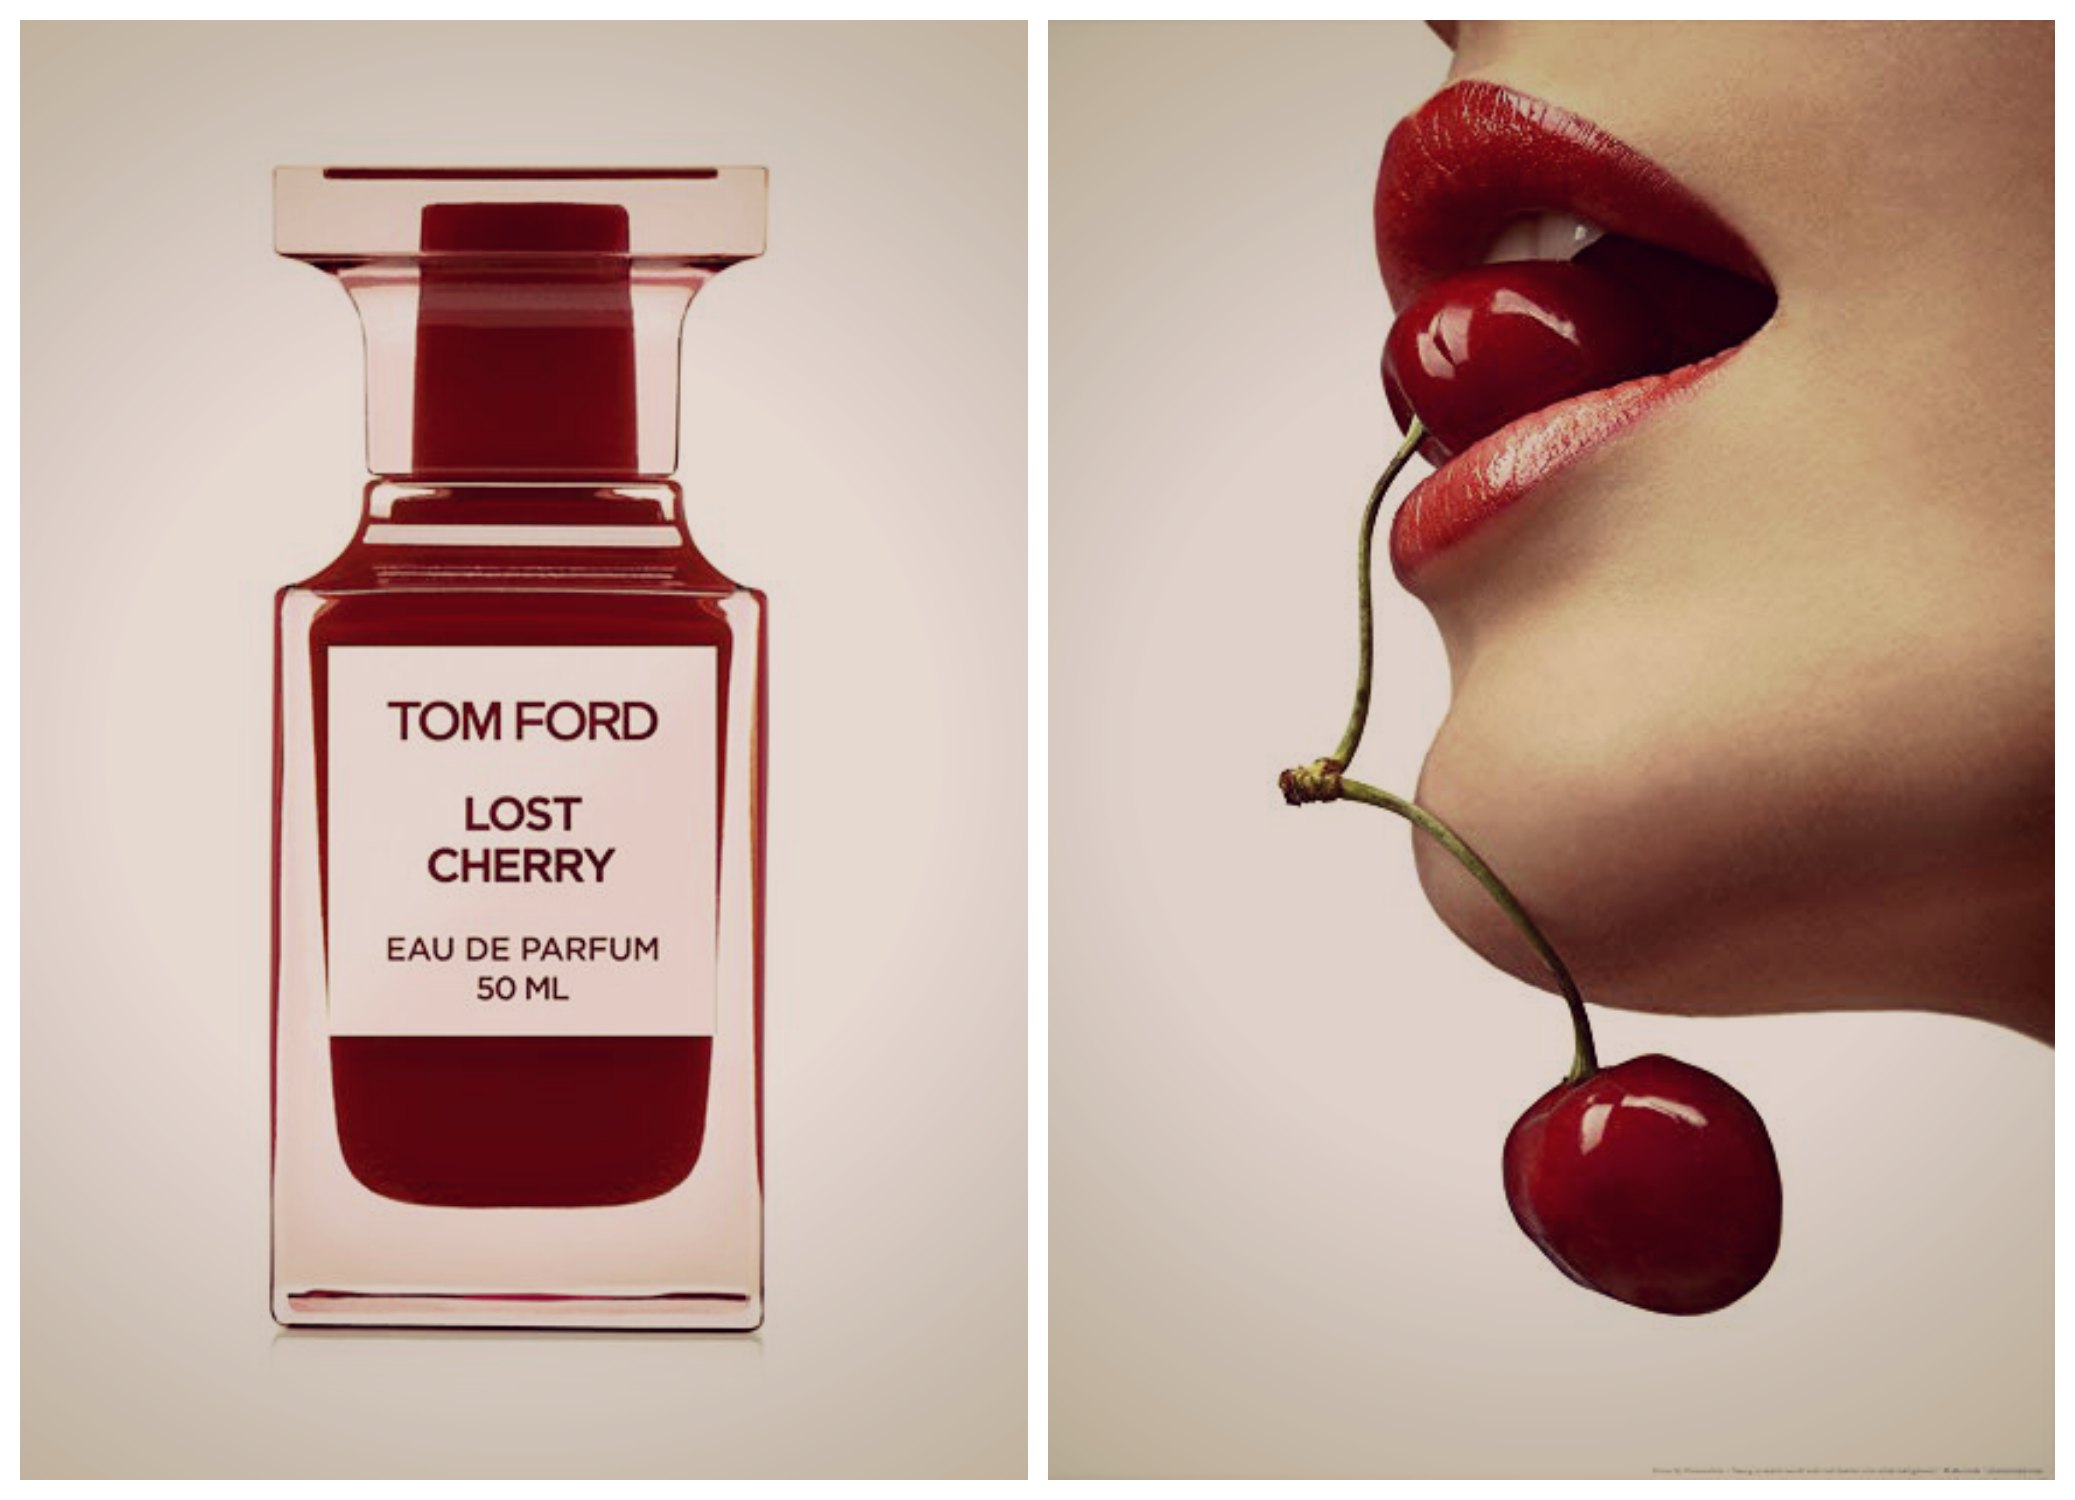 Tom Ford Beauty Products : Lipsticks & Perfumes at Bergdorf Goodman